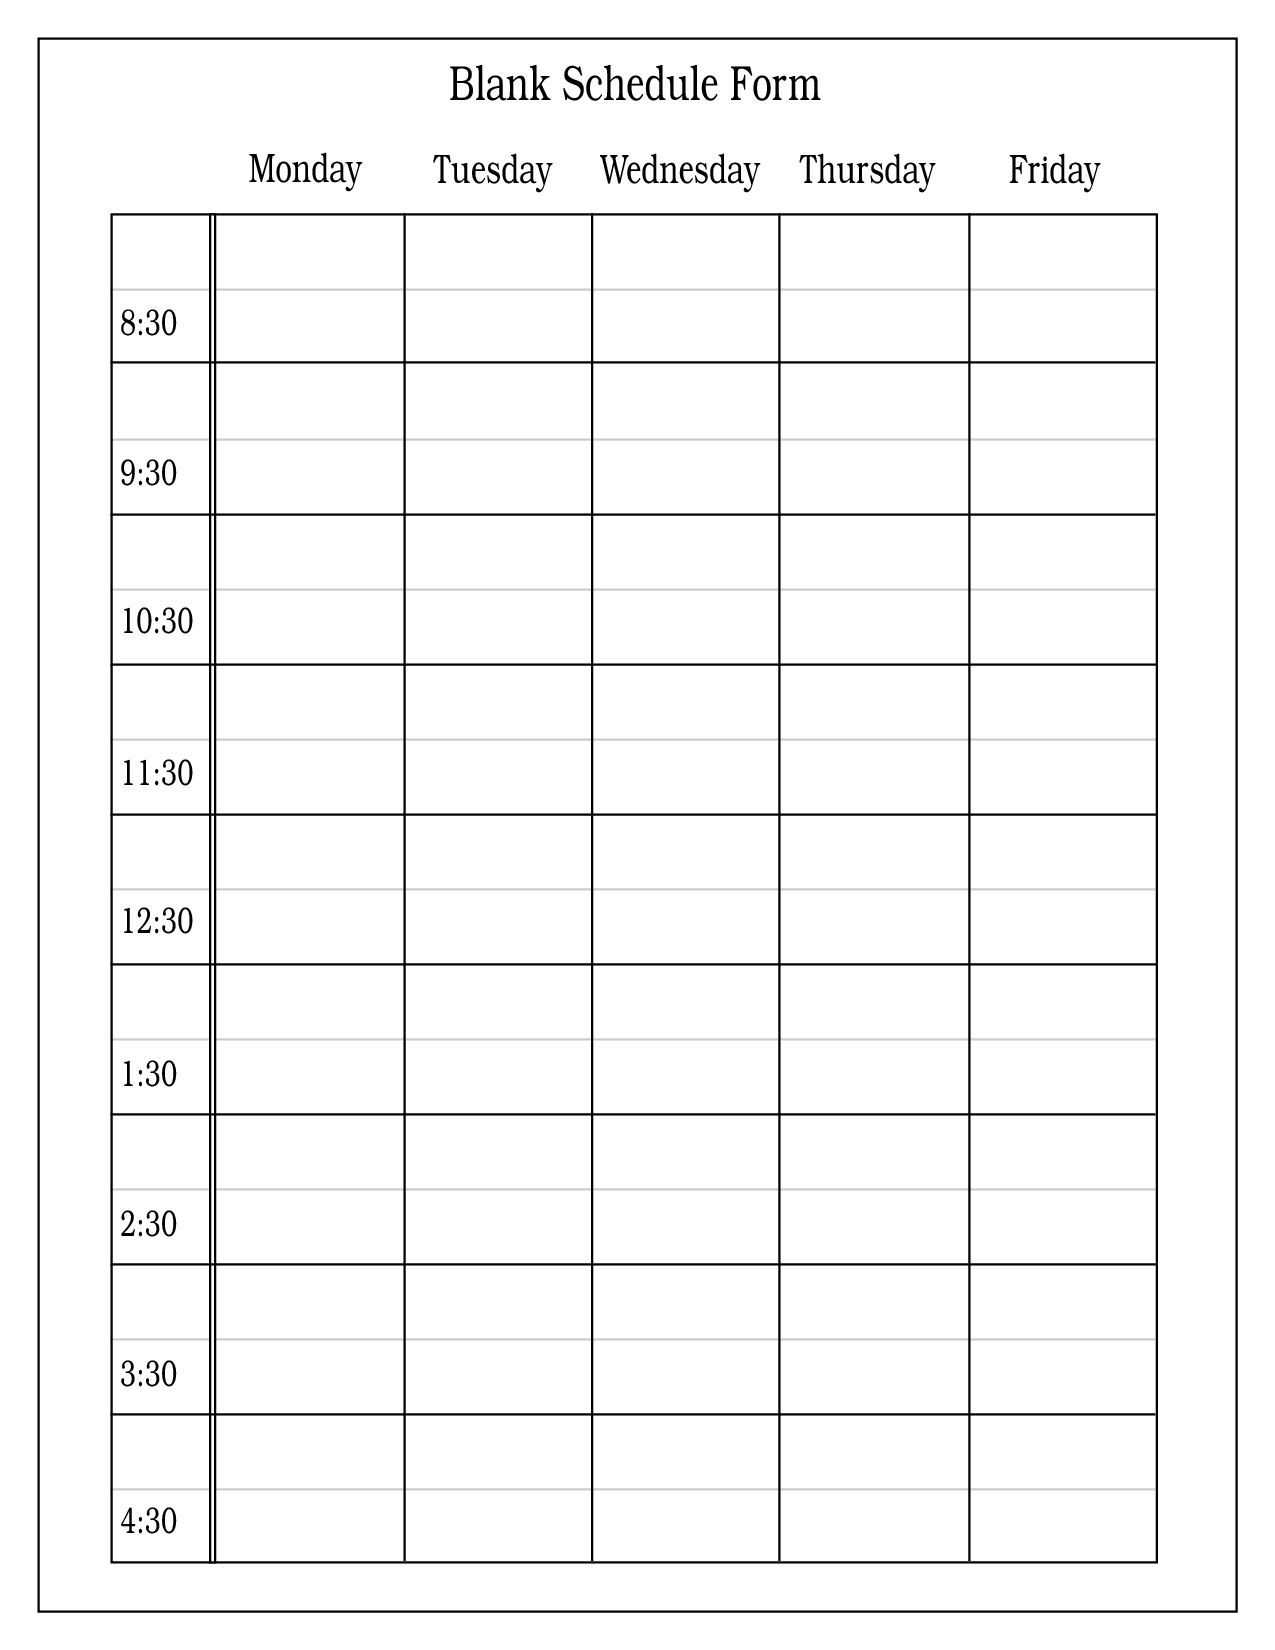 free-blank-daily-schedule-form-daily-calendar-template-excel-calendar